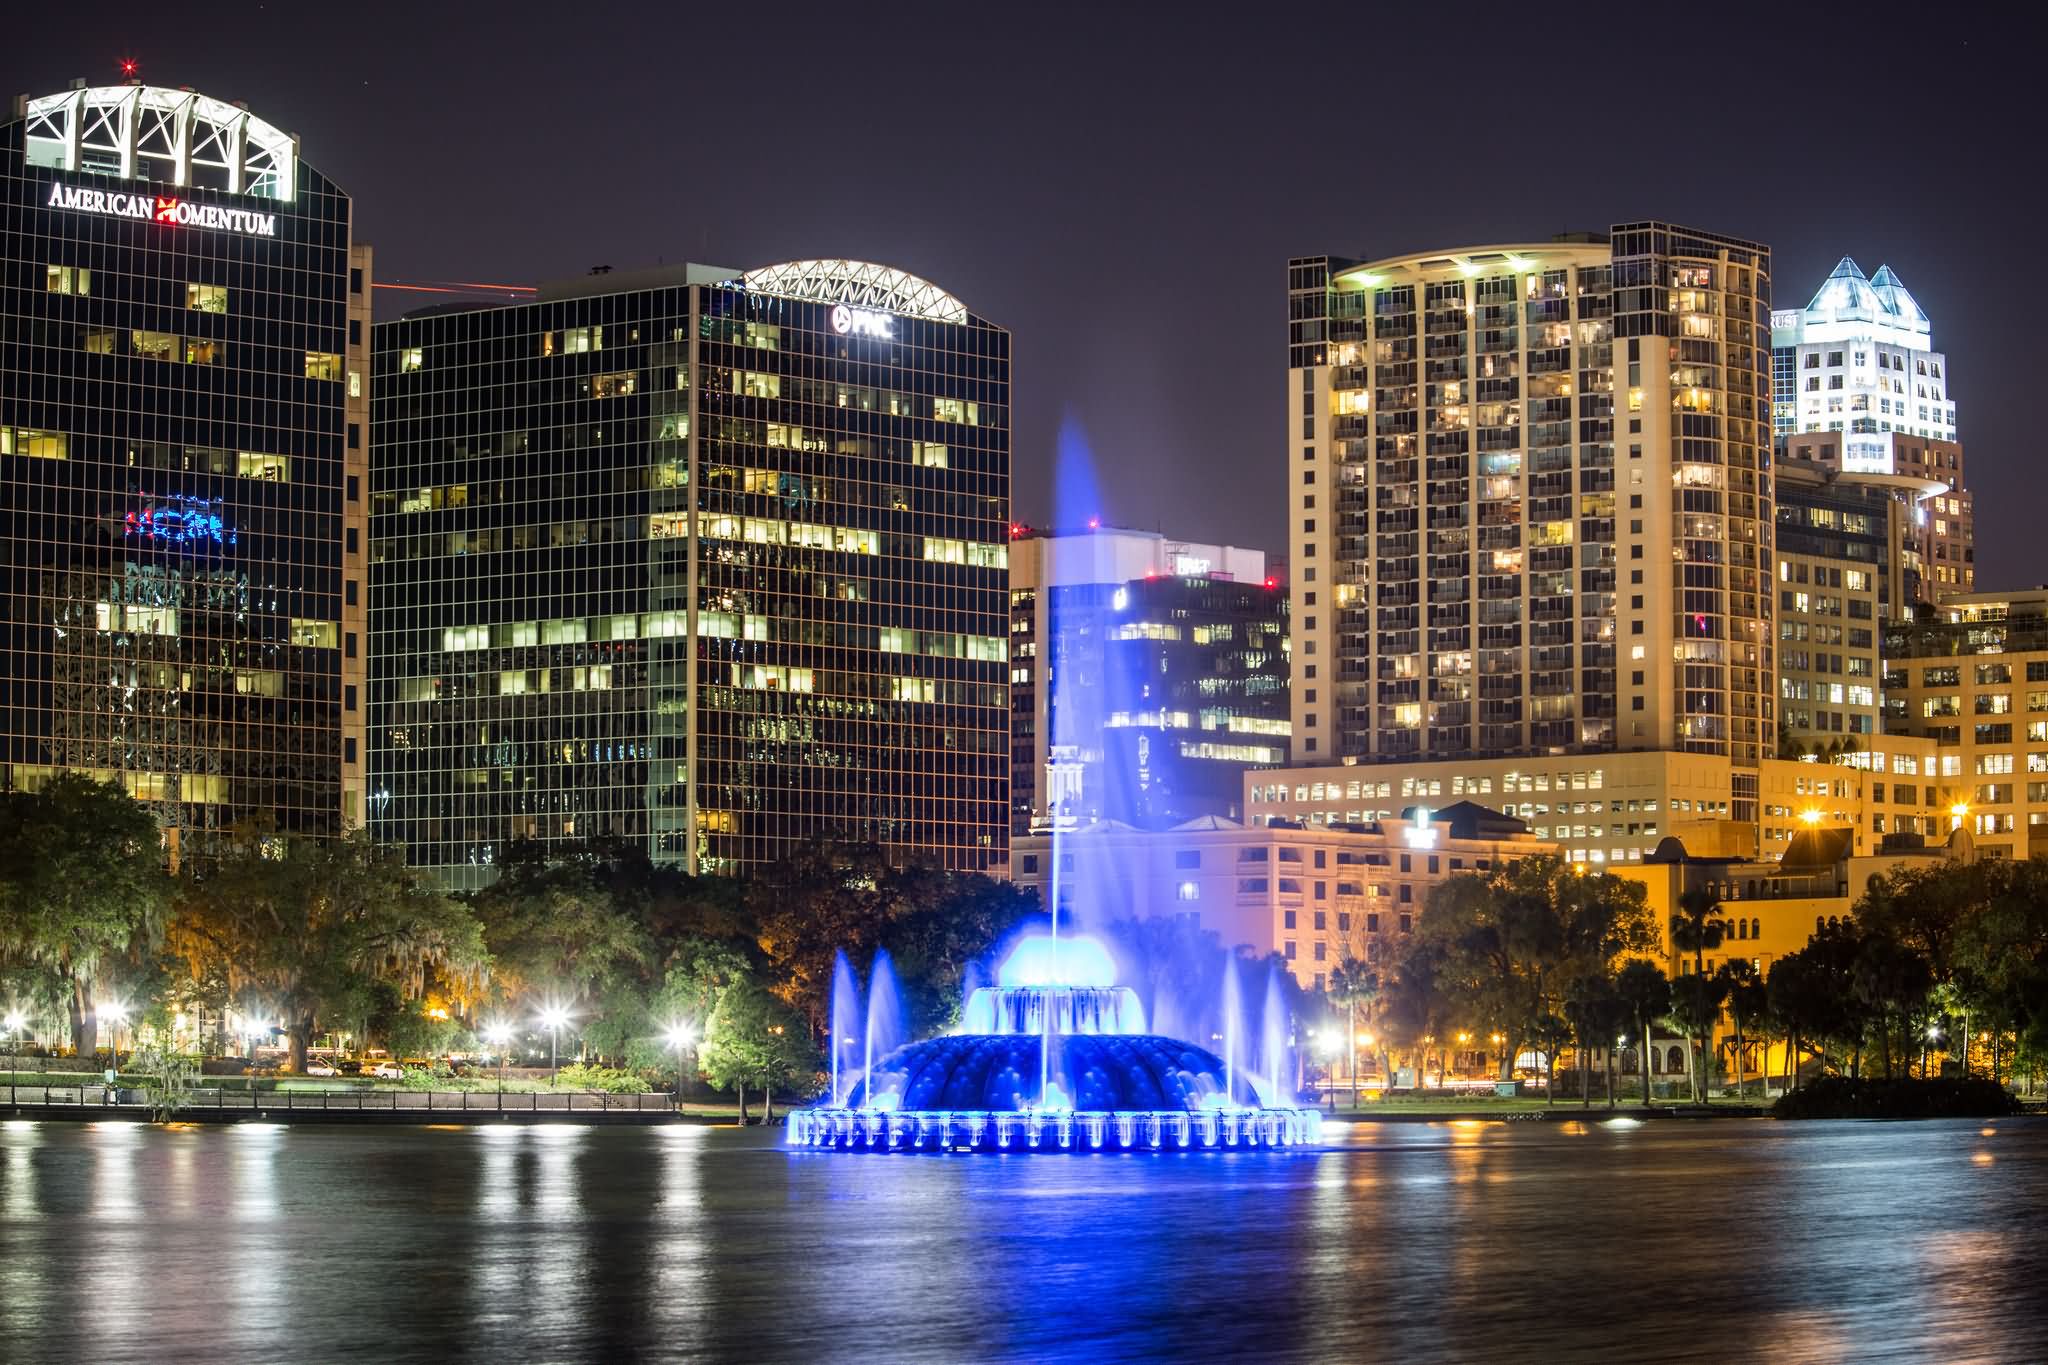 Beautiful Light Show & Fountains At Lake Eola In Night